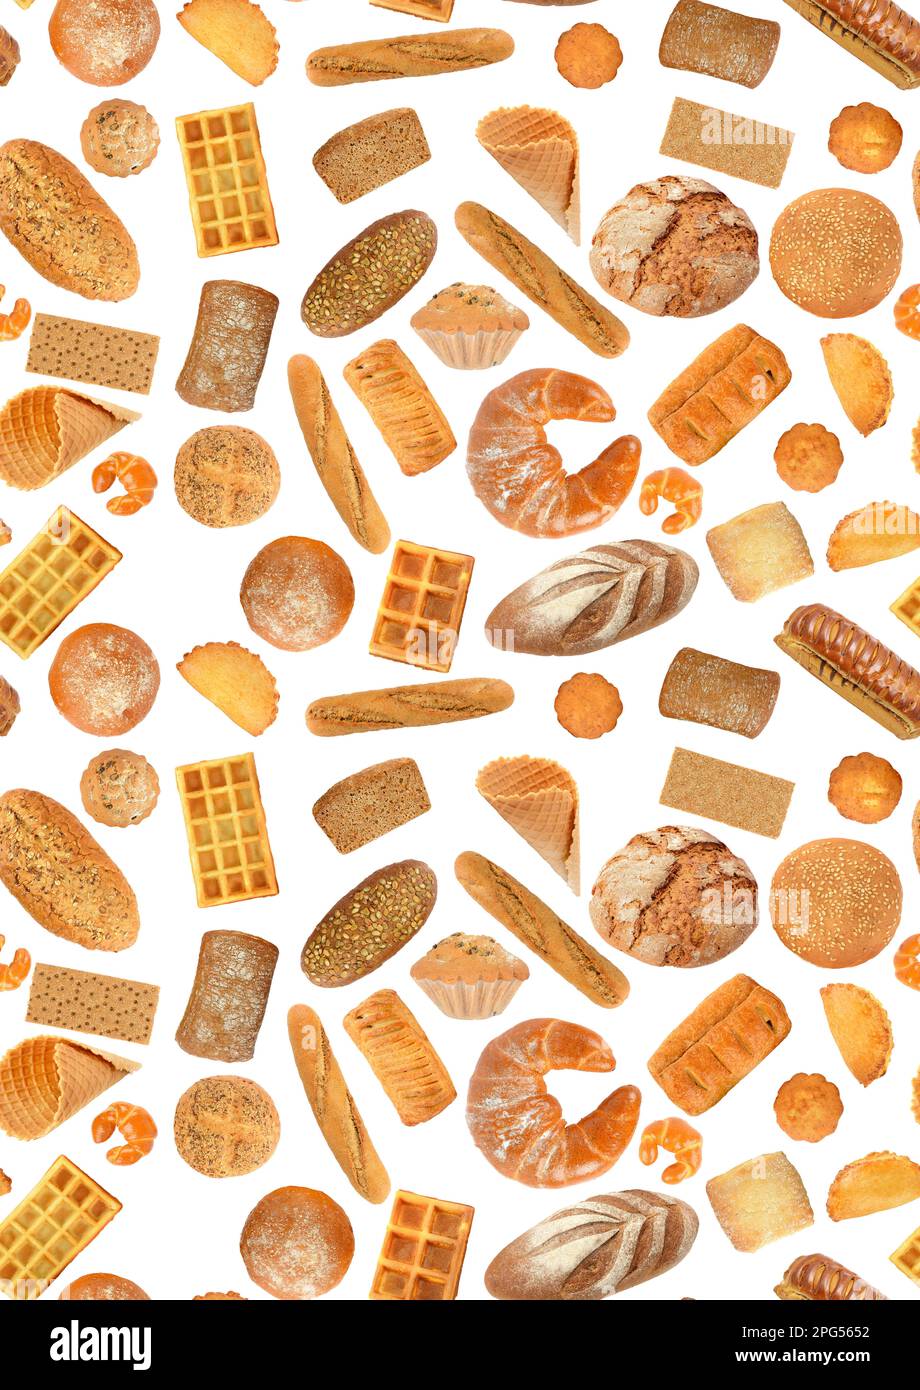 Big seamless pattern of bread products isolated on white background. Stock Photo